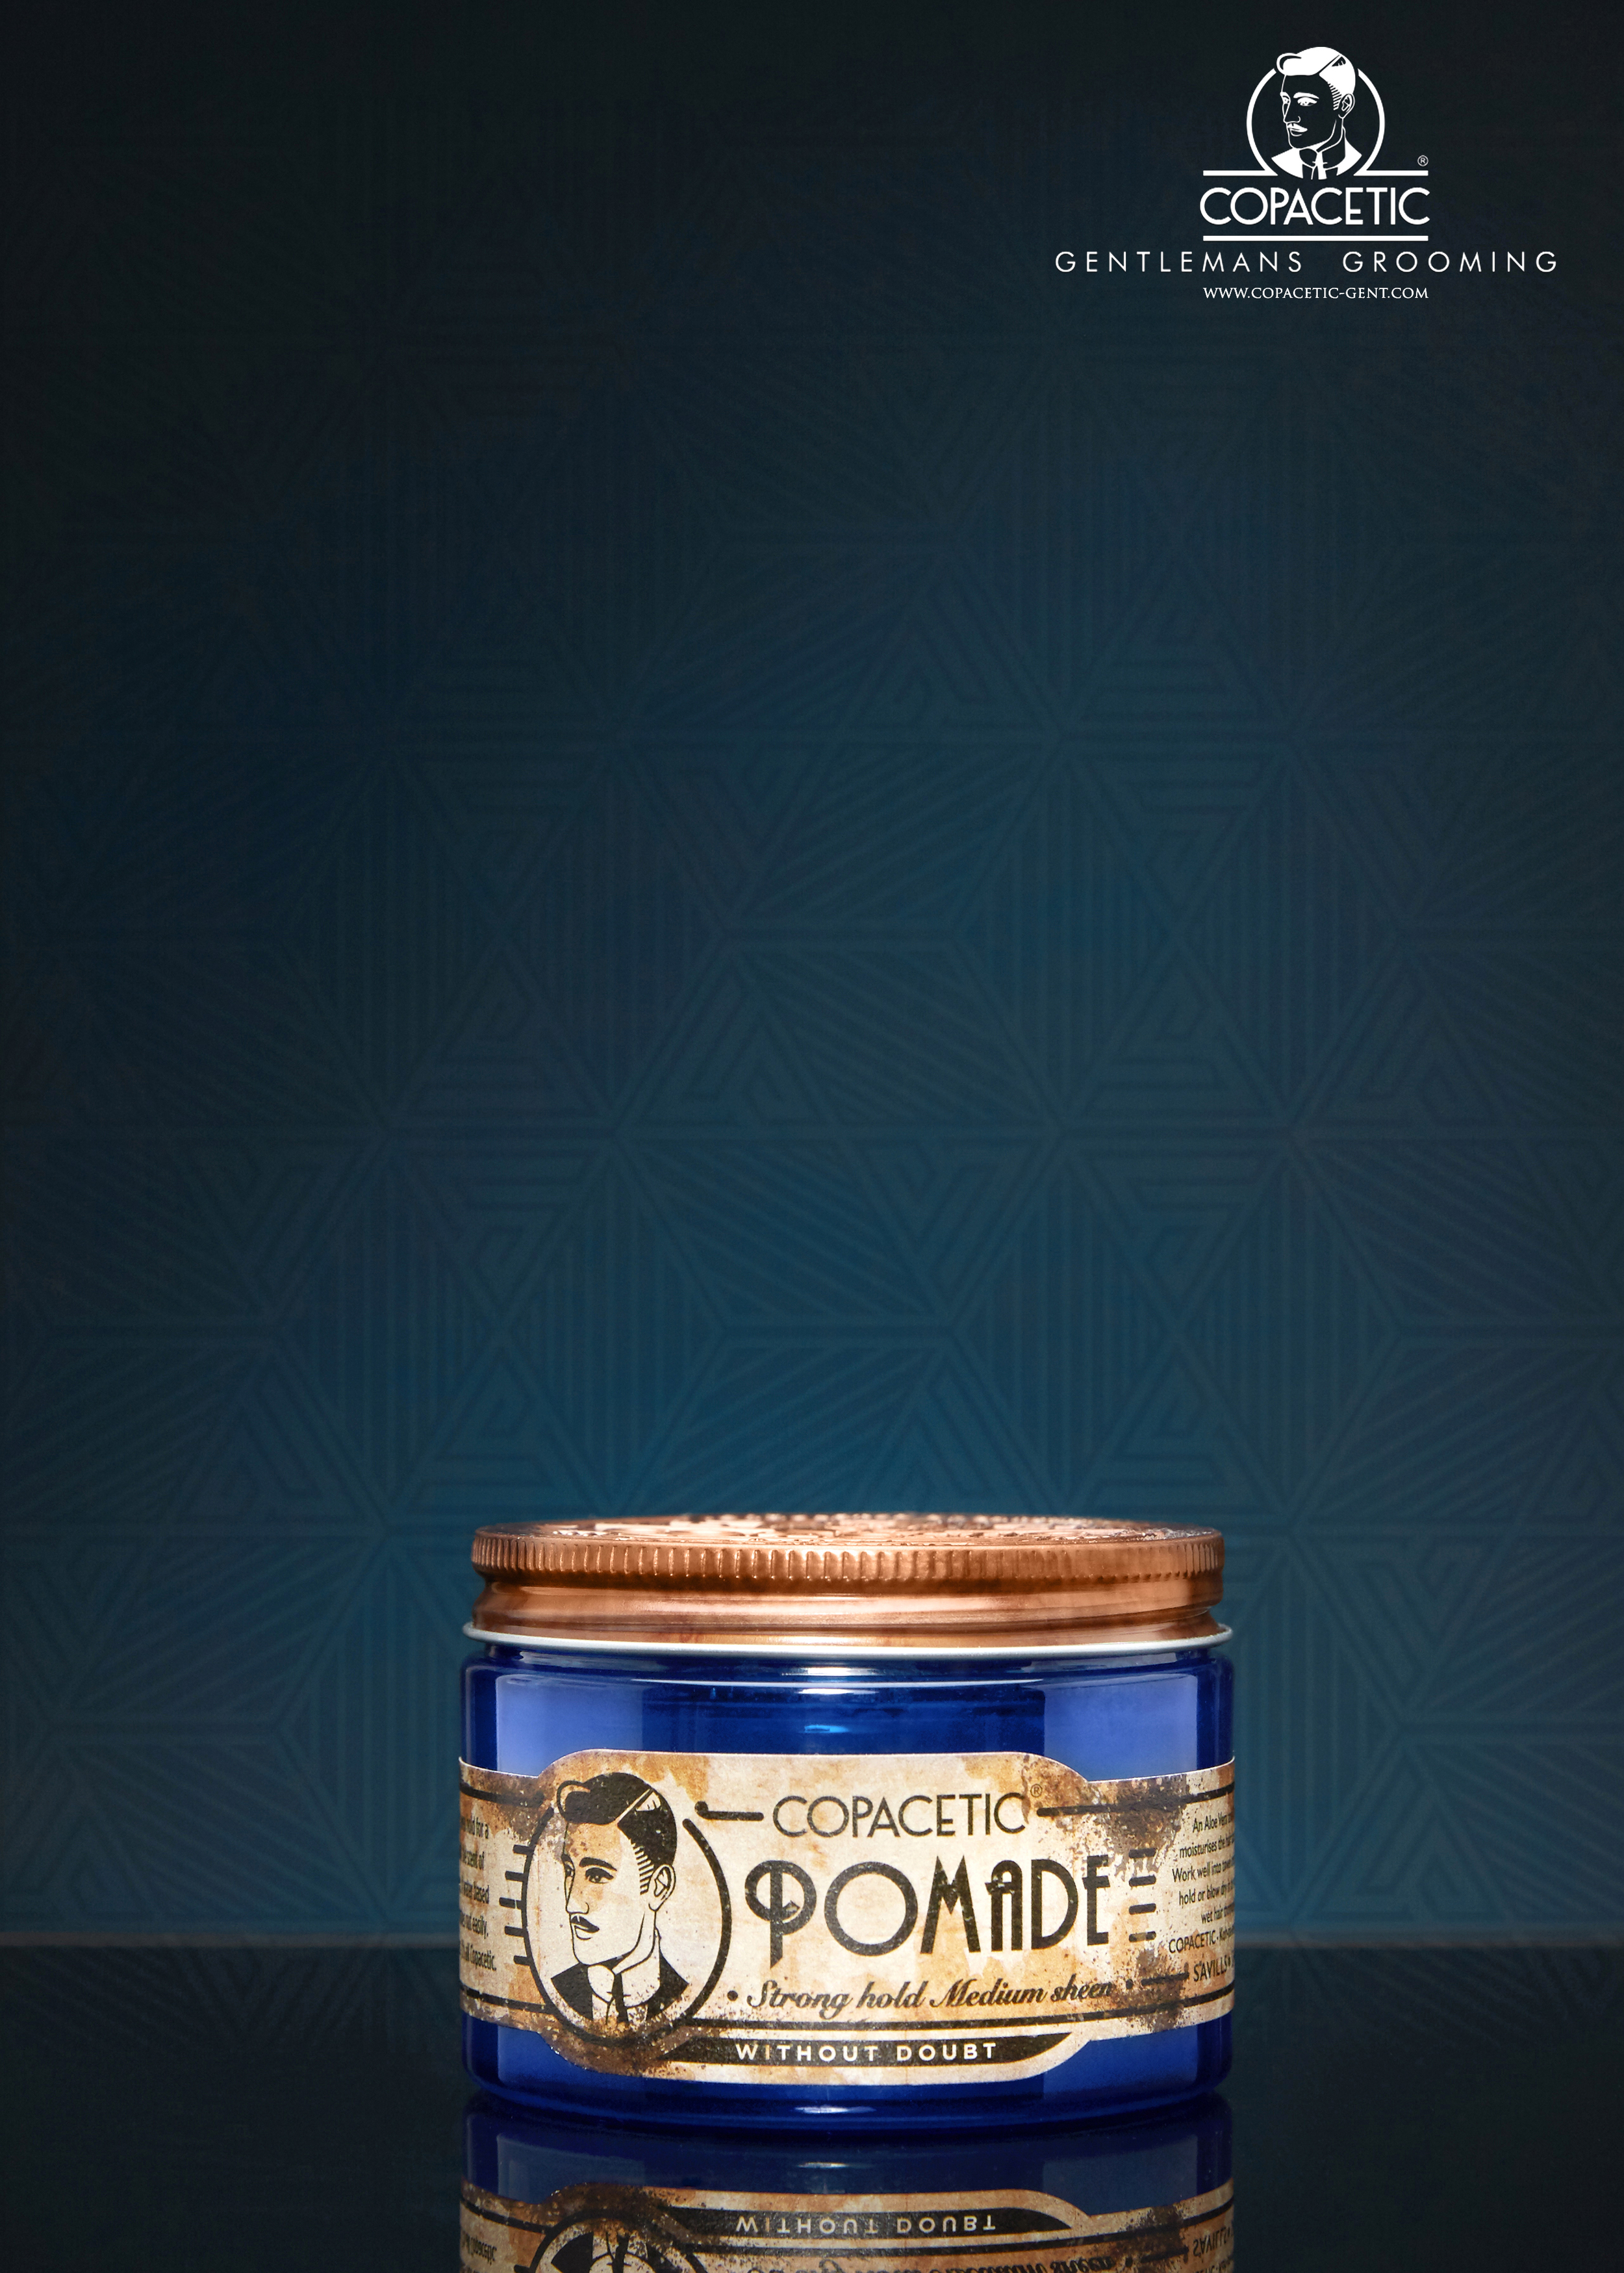 Copacetic-Product-Pomade-1.jpg